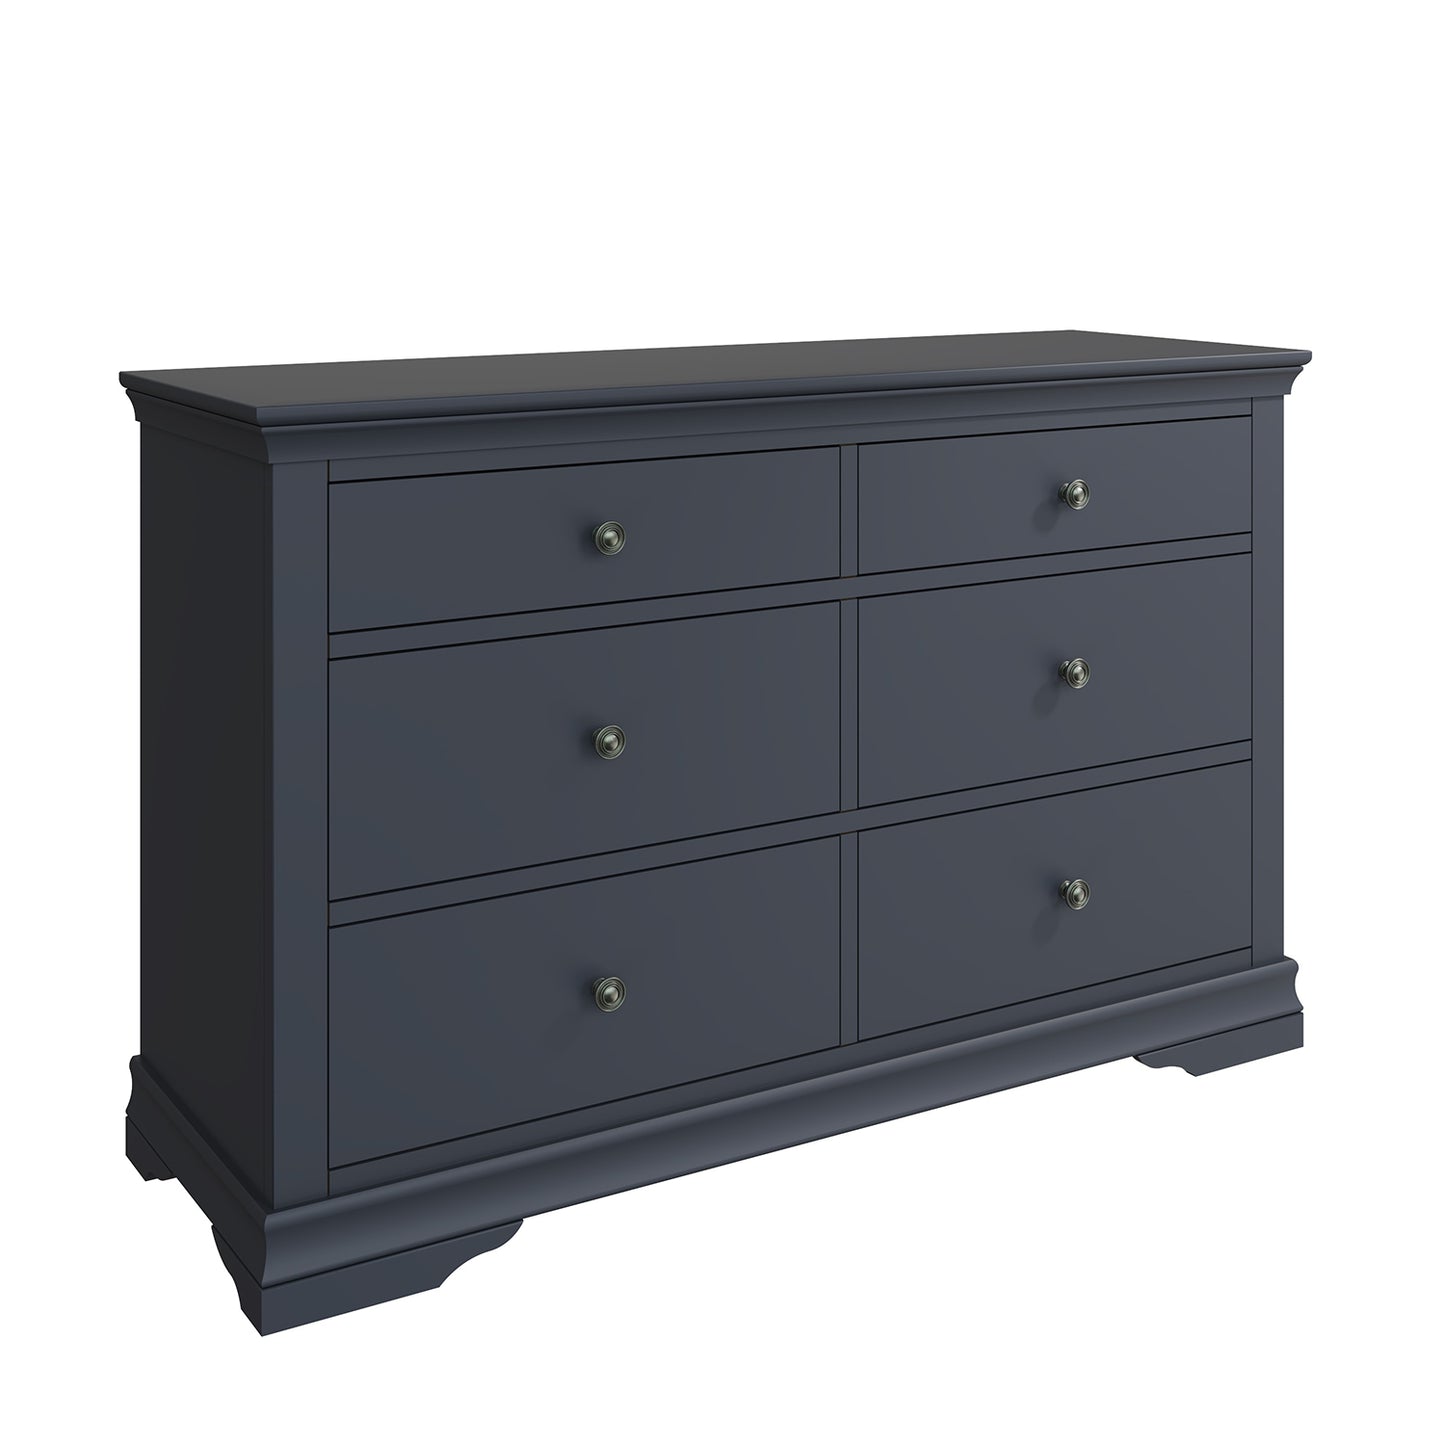 Toulouse Midnight Grey Chest Of Drawers - 6 Drawer Chest